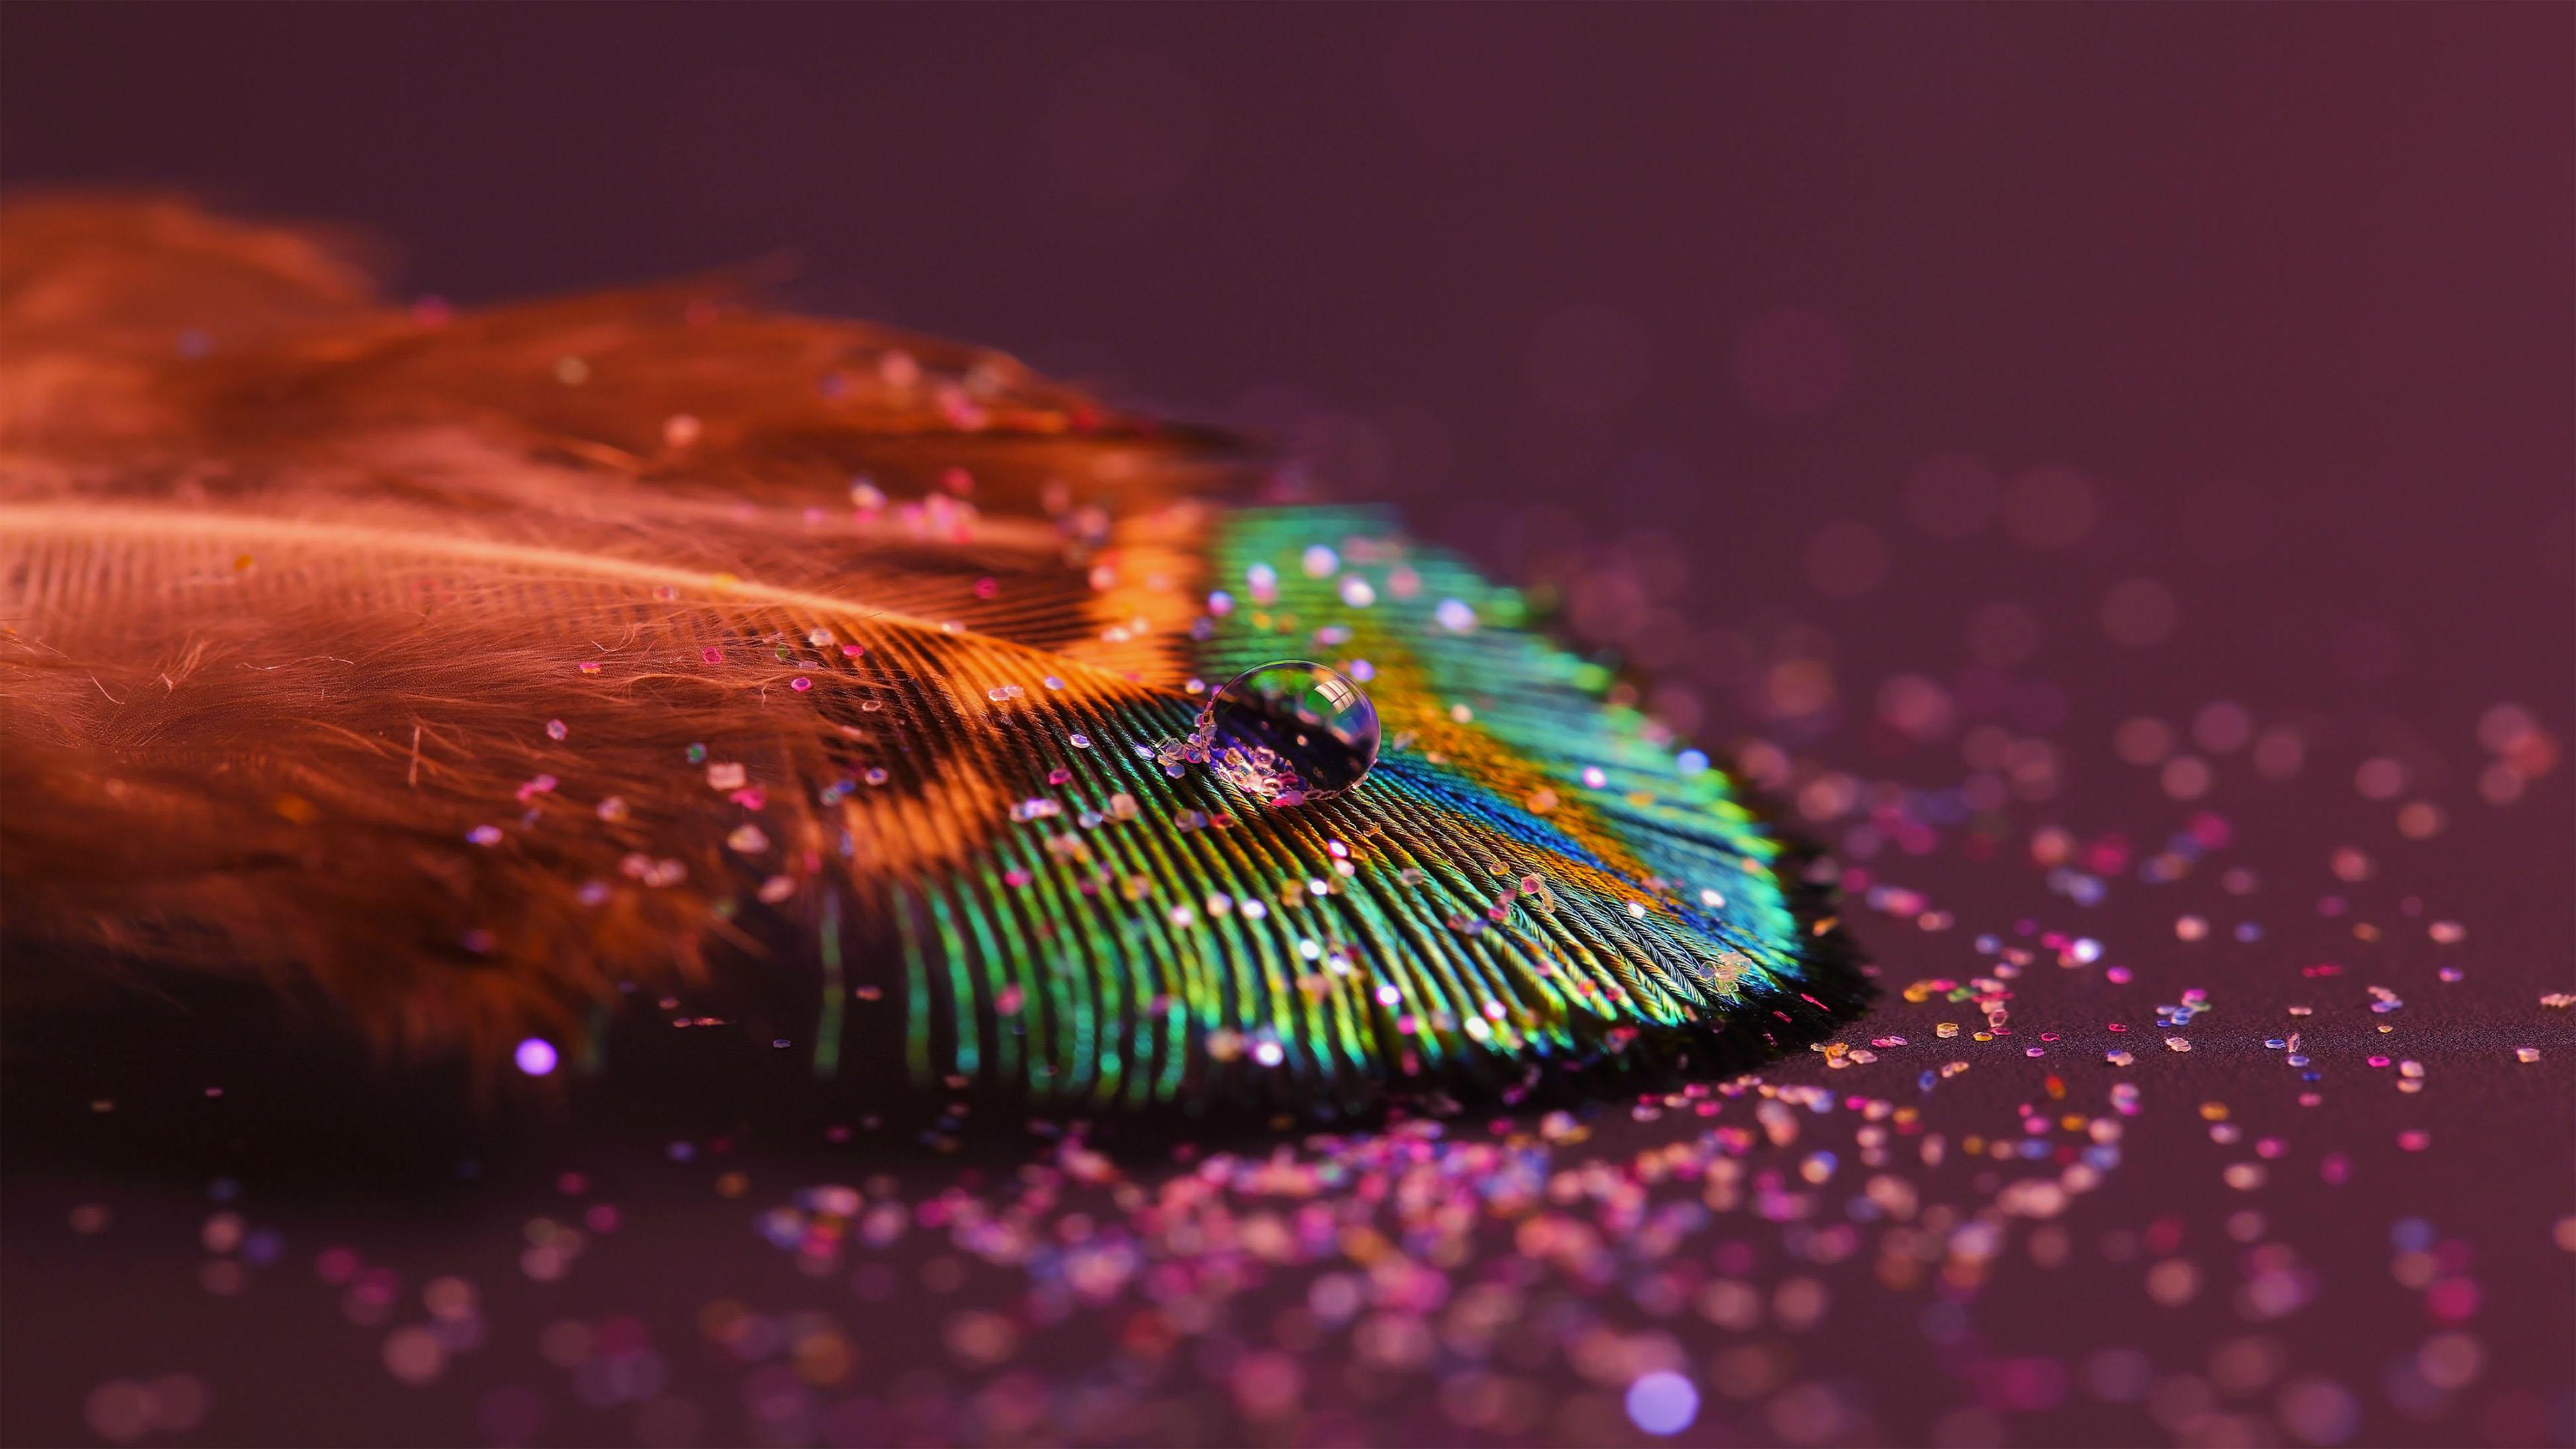 Peacock Feather 4K wallpaper